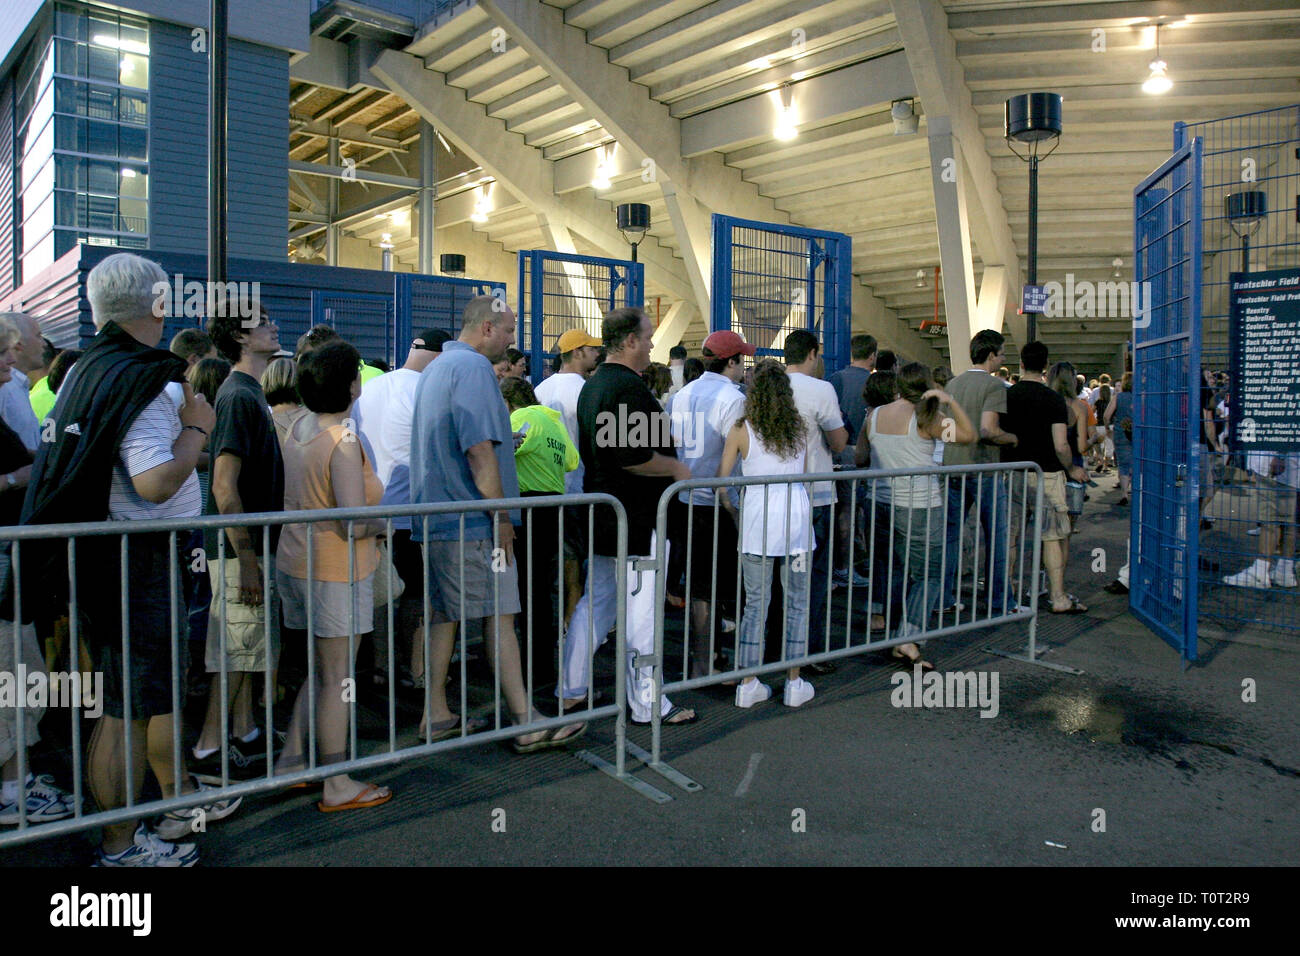 Concert fans are shown lined up at the entrance gate of a stadium event. Stock Photo